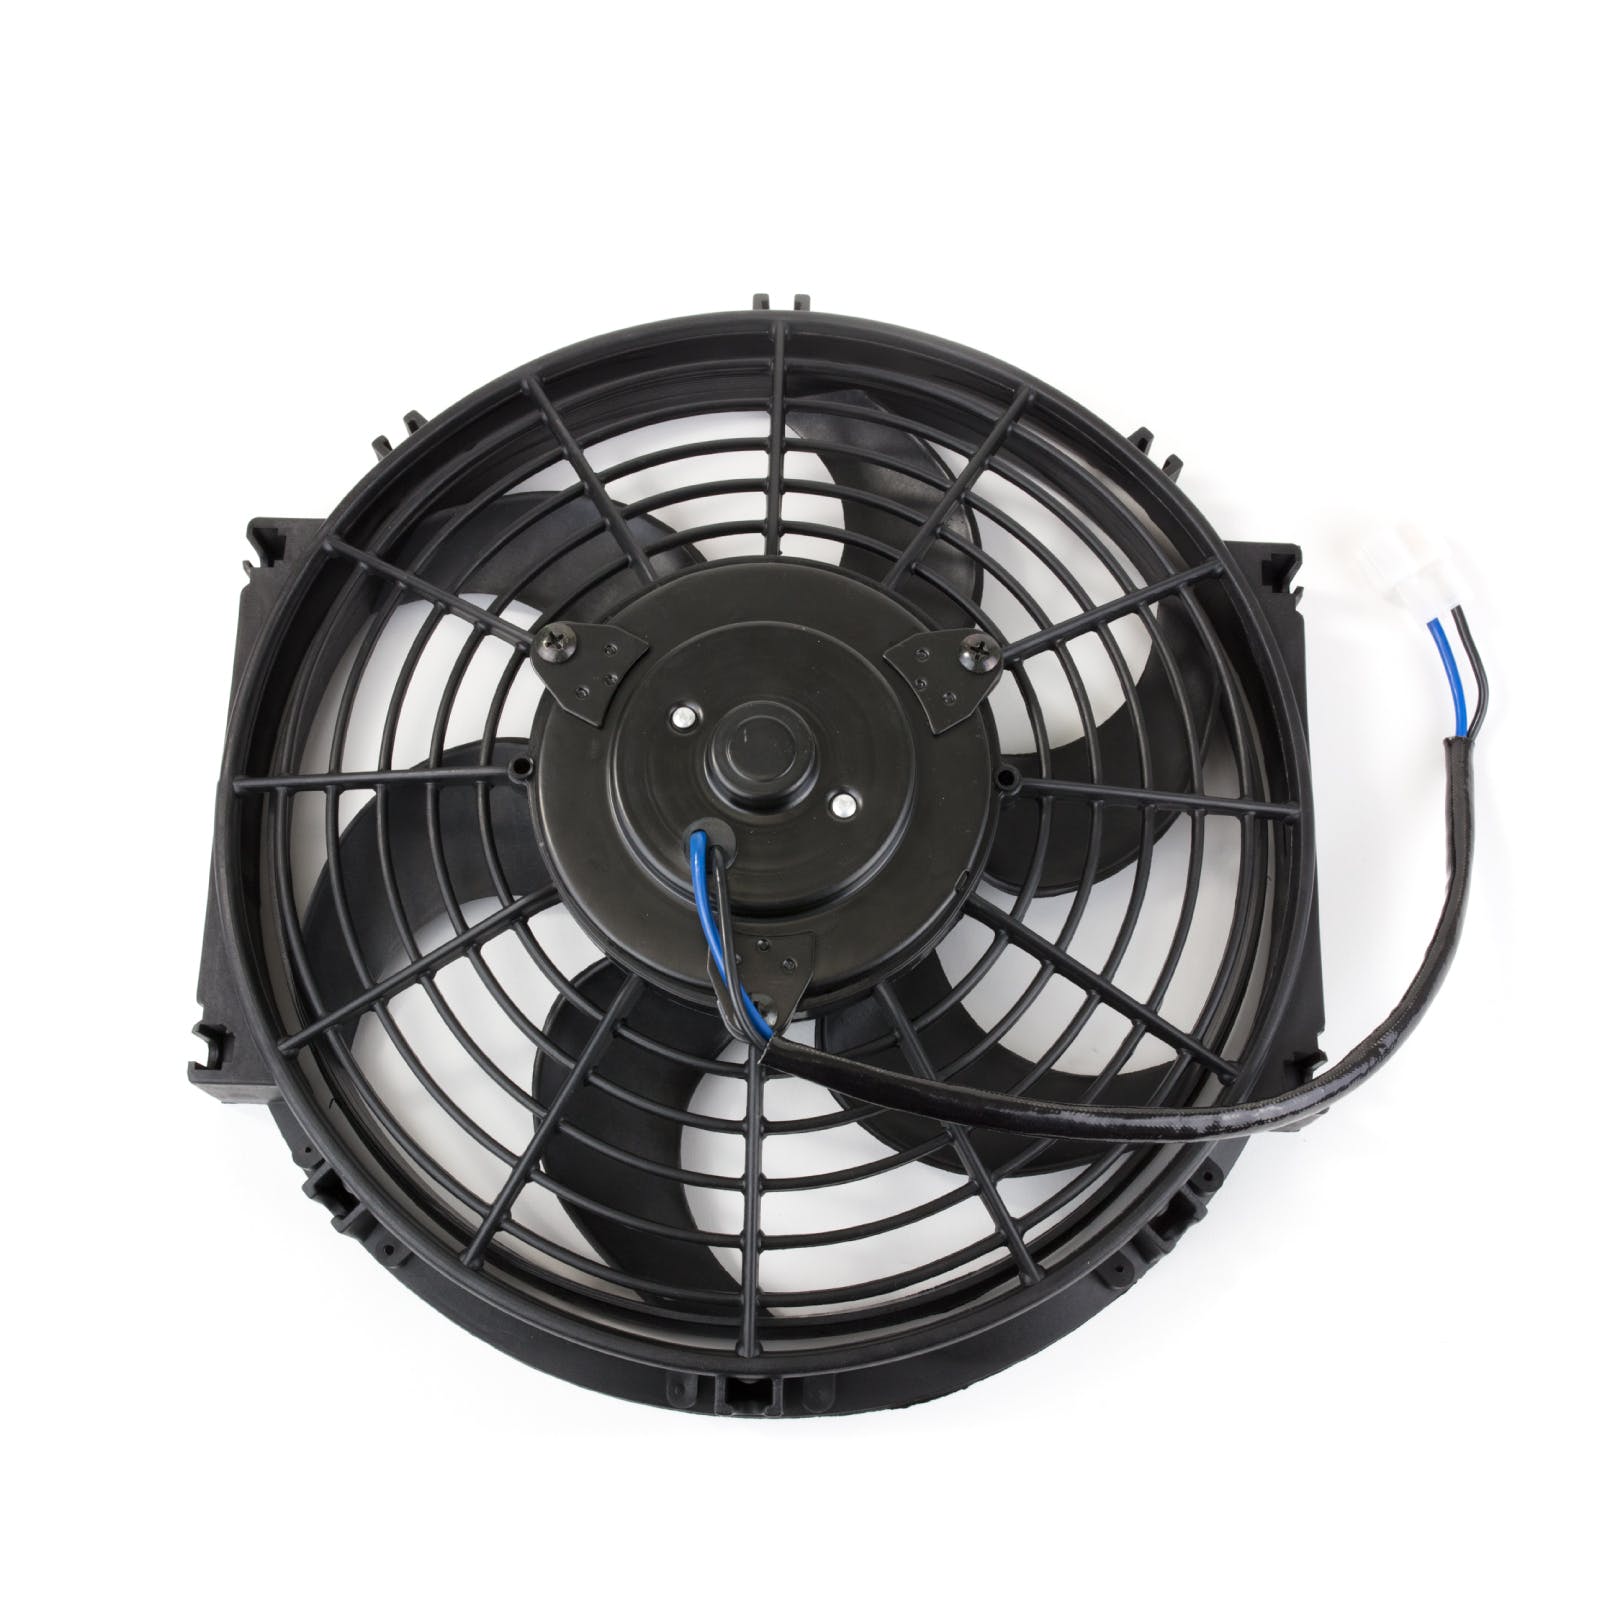 Top Street Performance HC6102 10 inch Universal Electric Cooling Fan, S-Blade